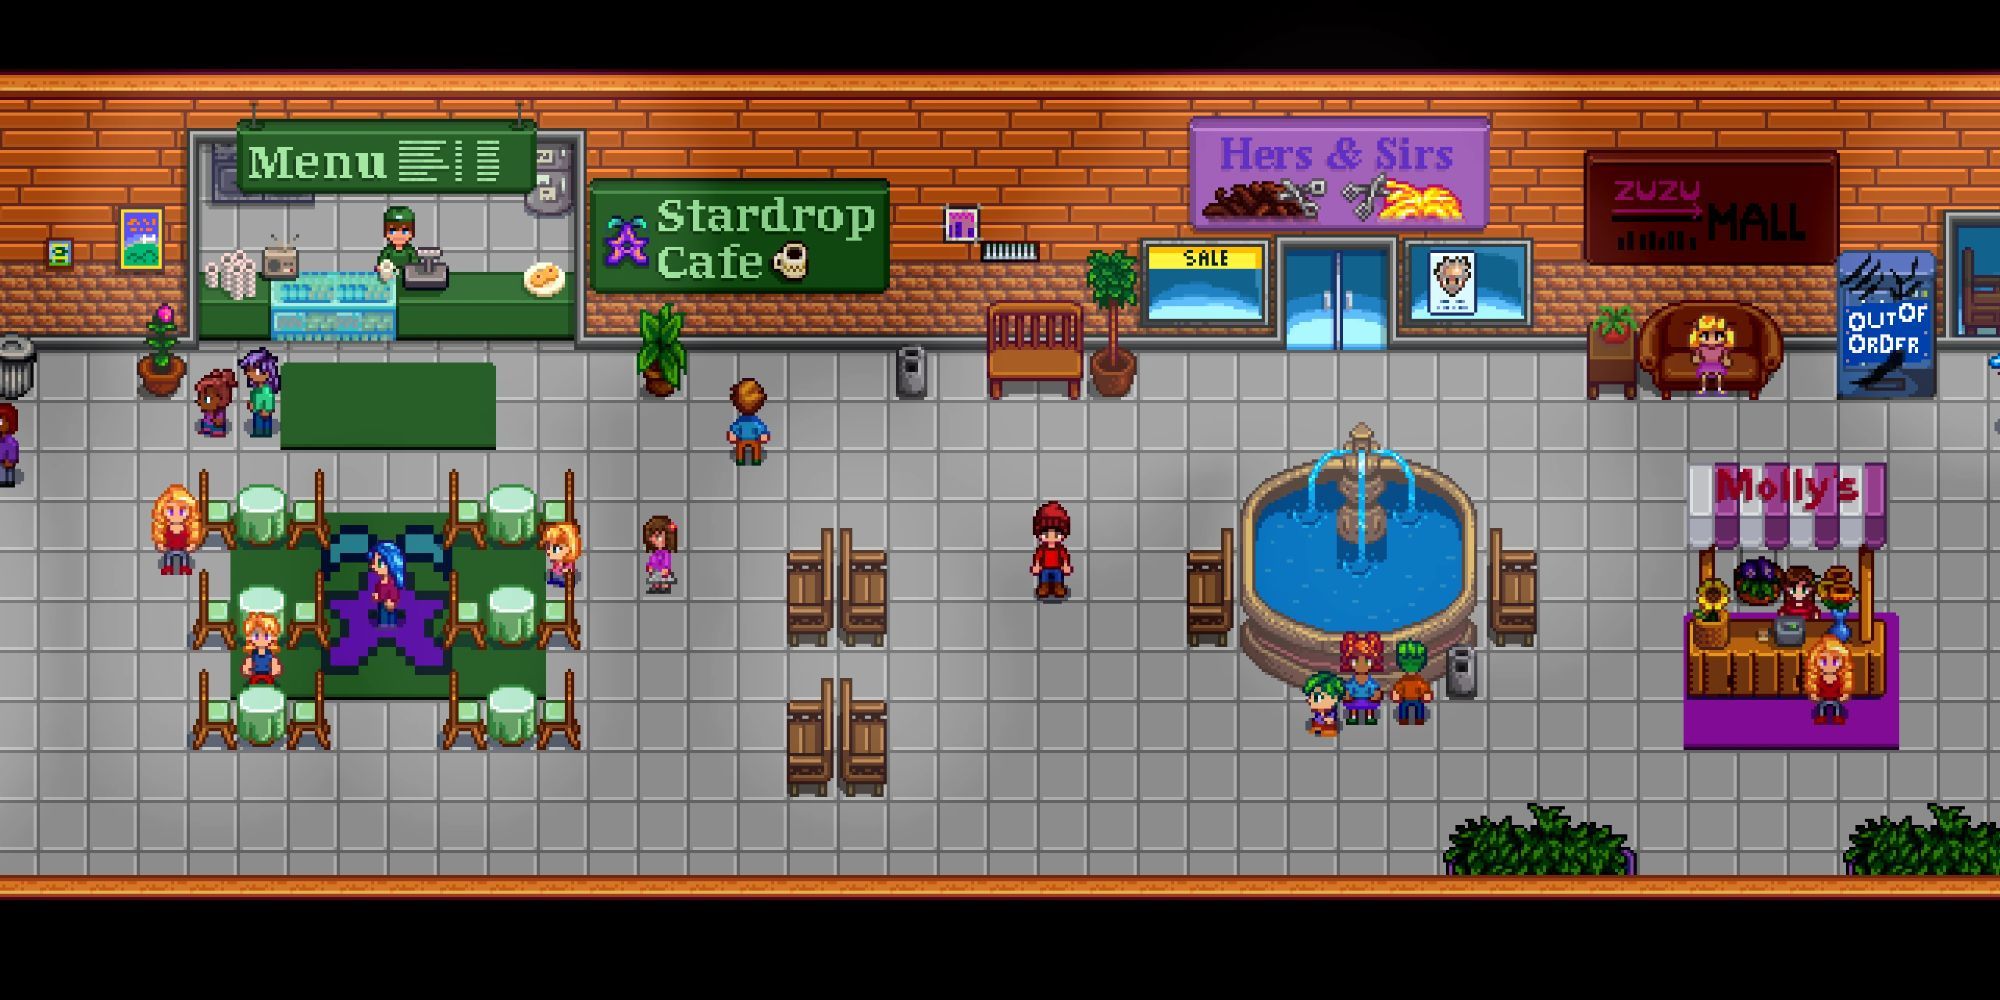 Stardew Valley mod Downtown Zuzu's mall area, including the stardrop cafe and hers & sirs hair salon.